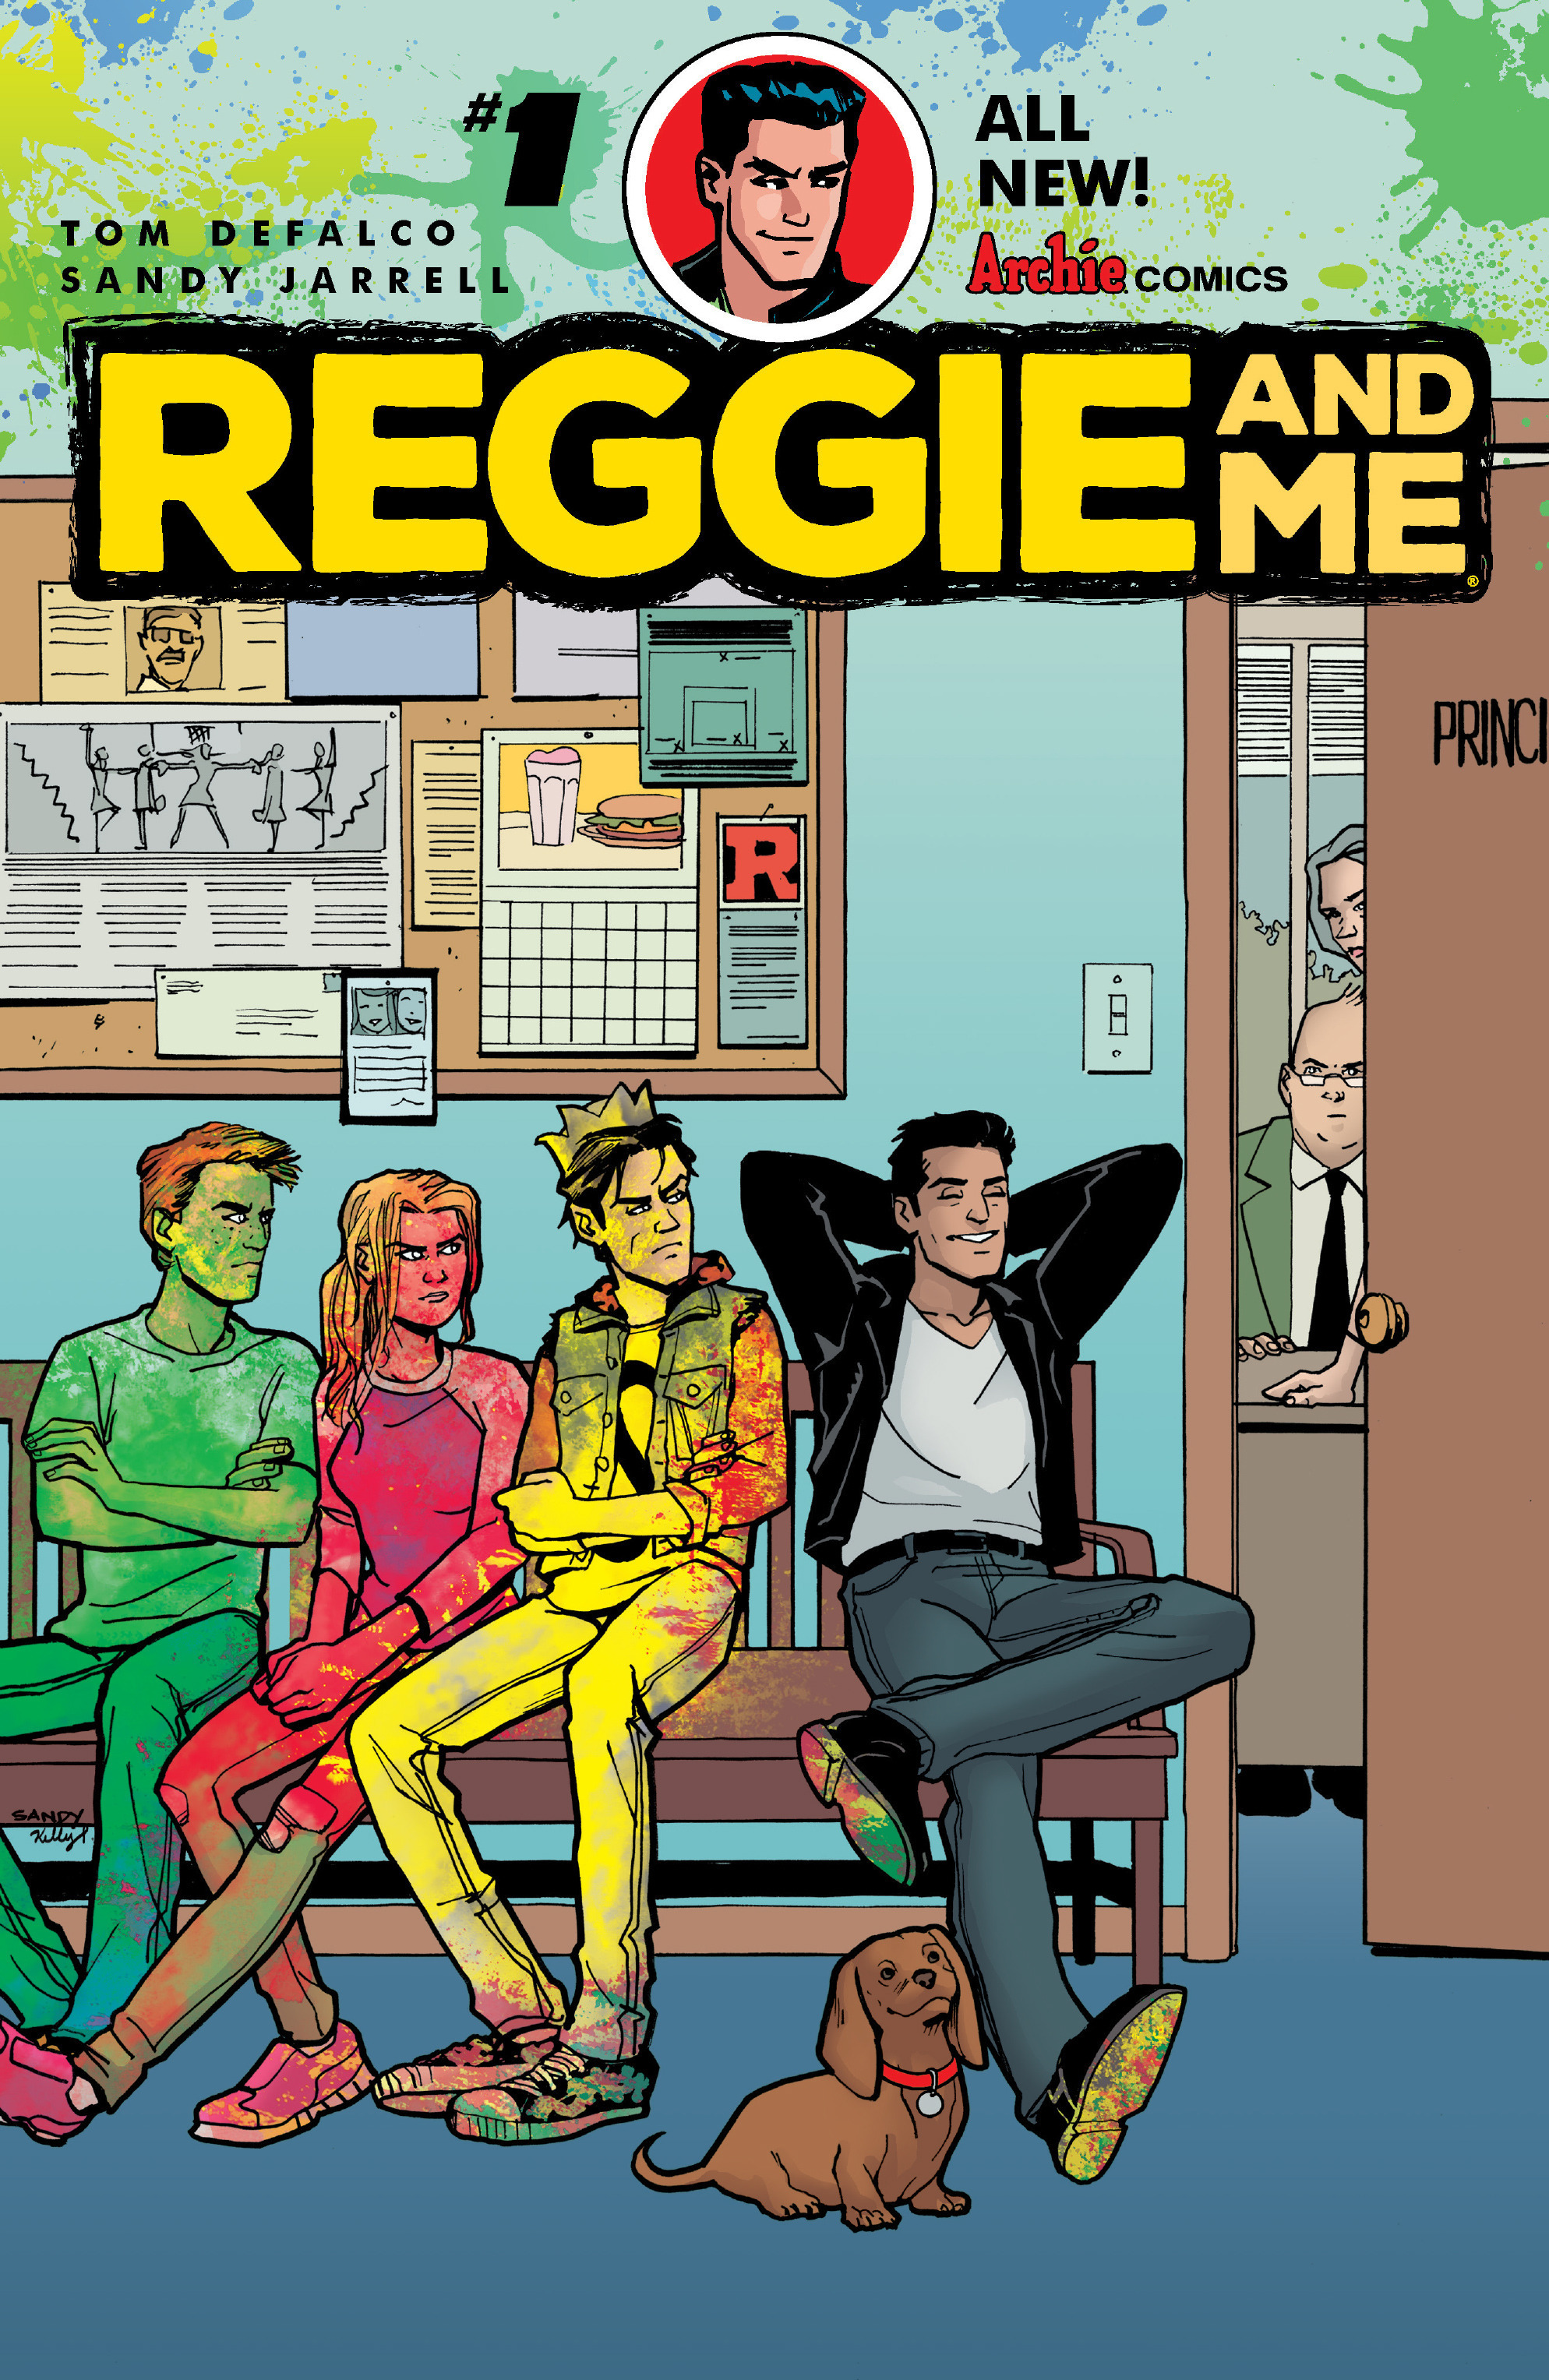 Read online Reggie and Me comic -  Issue #1 - 1